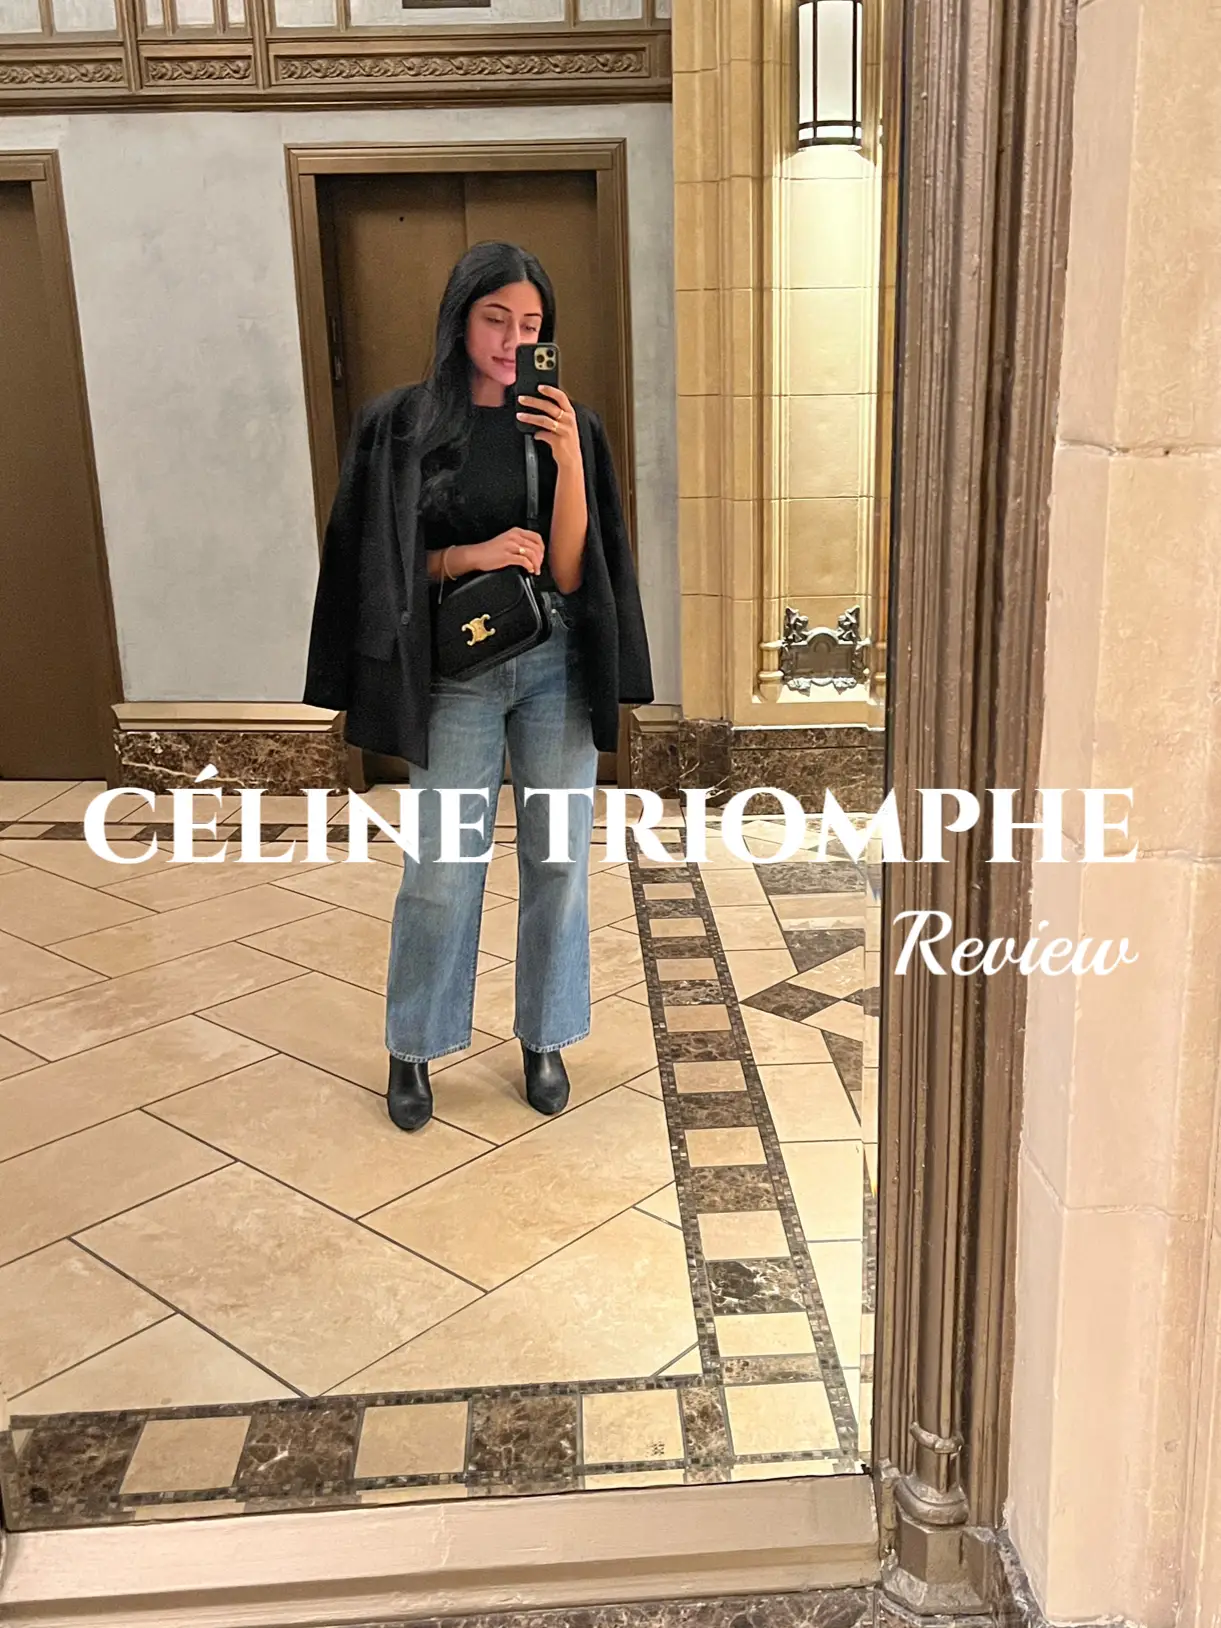 Celine Triomphe Bag Review: What It Fits & How to Wear It